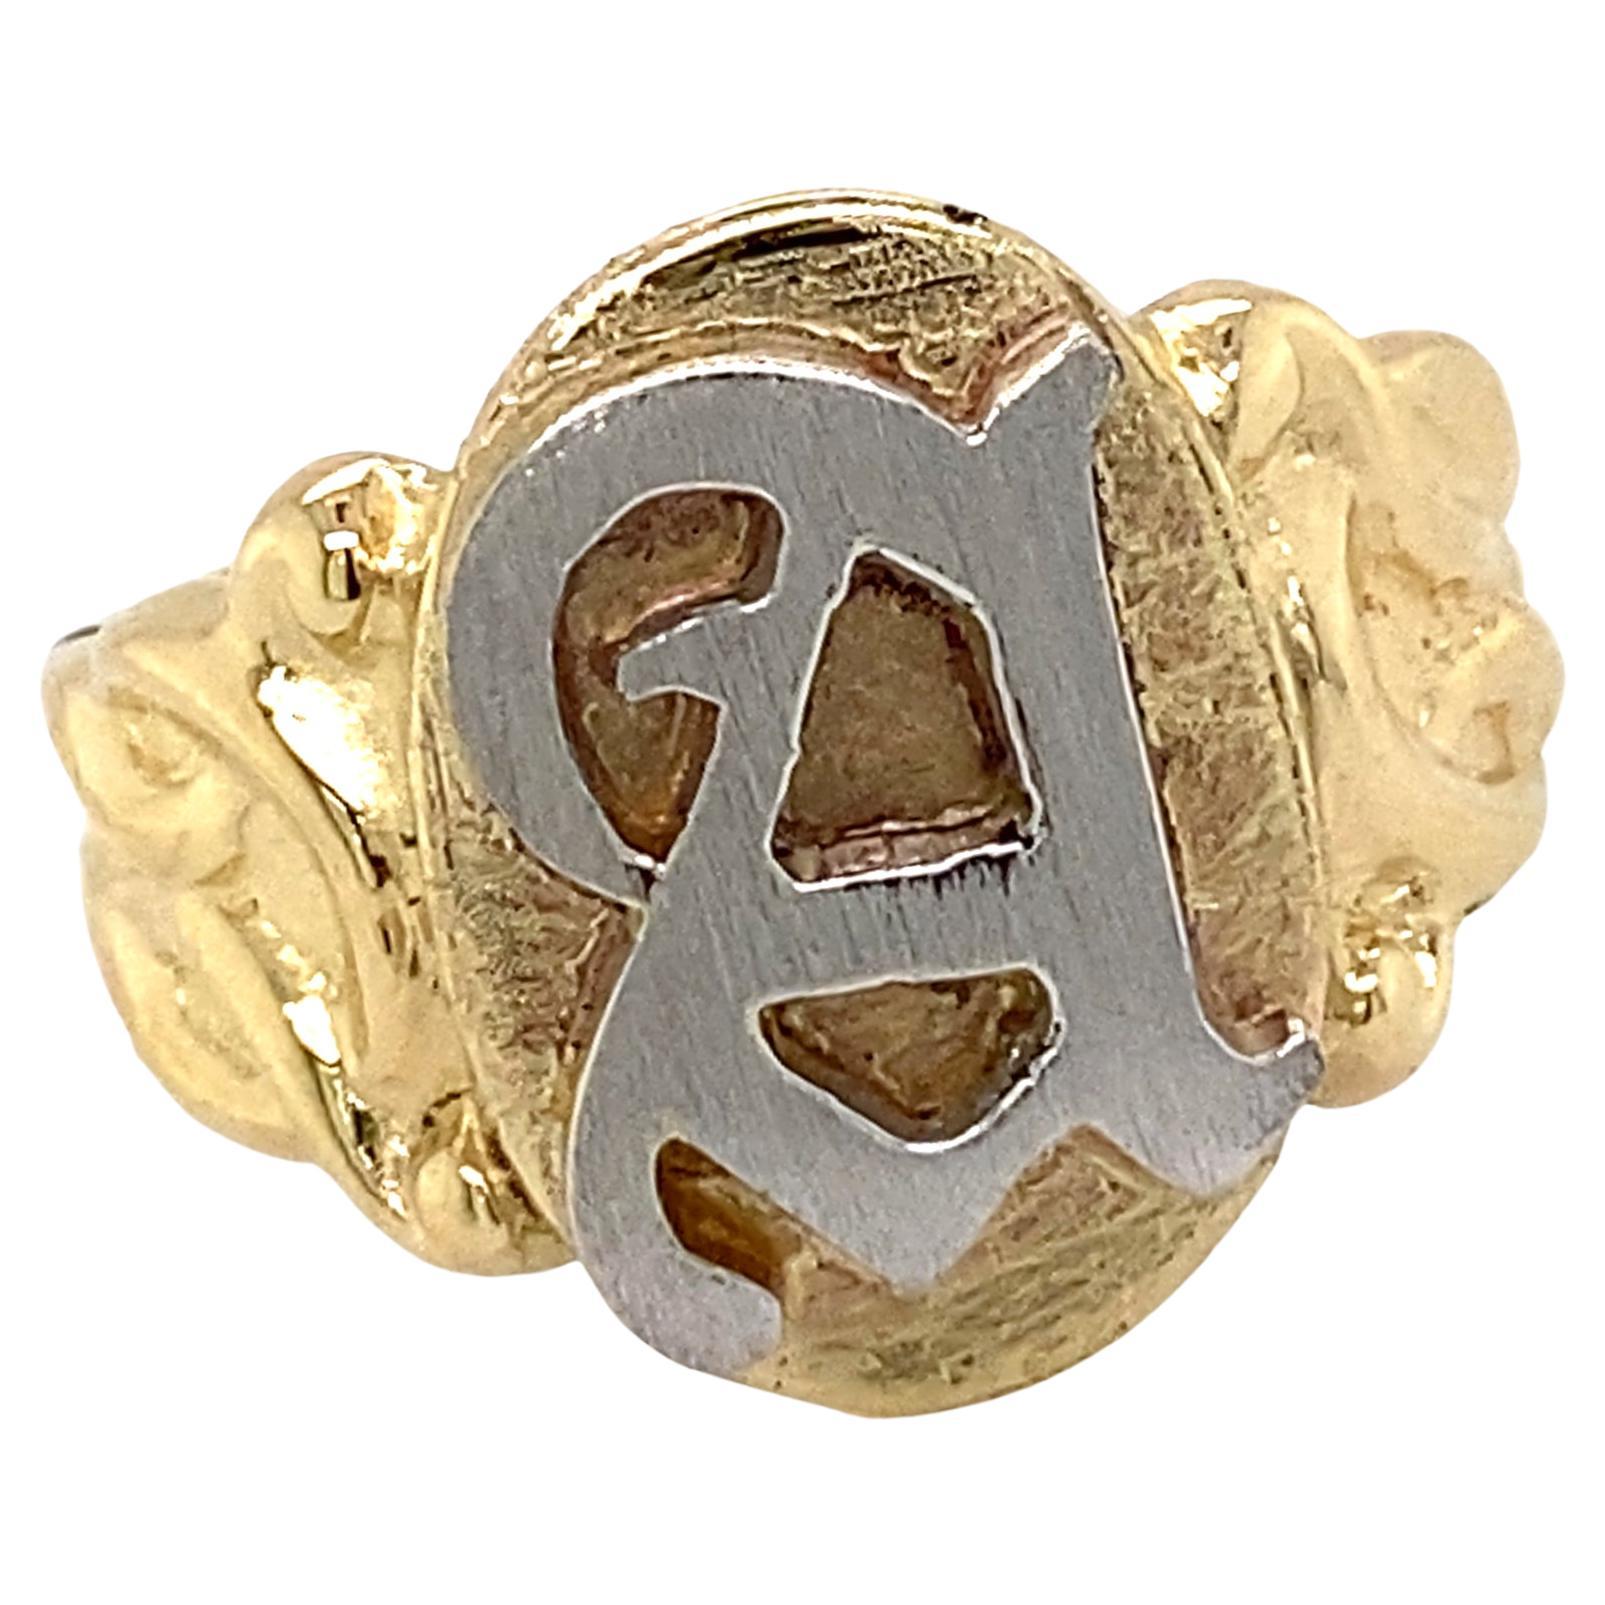 Eytan Brandes had an old blank silver signet ring that's been lying around the store for so long that no one can remember where it came from.  He always liked the design but thought it would look better in gold (as most things do), so he cast a copy